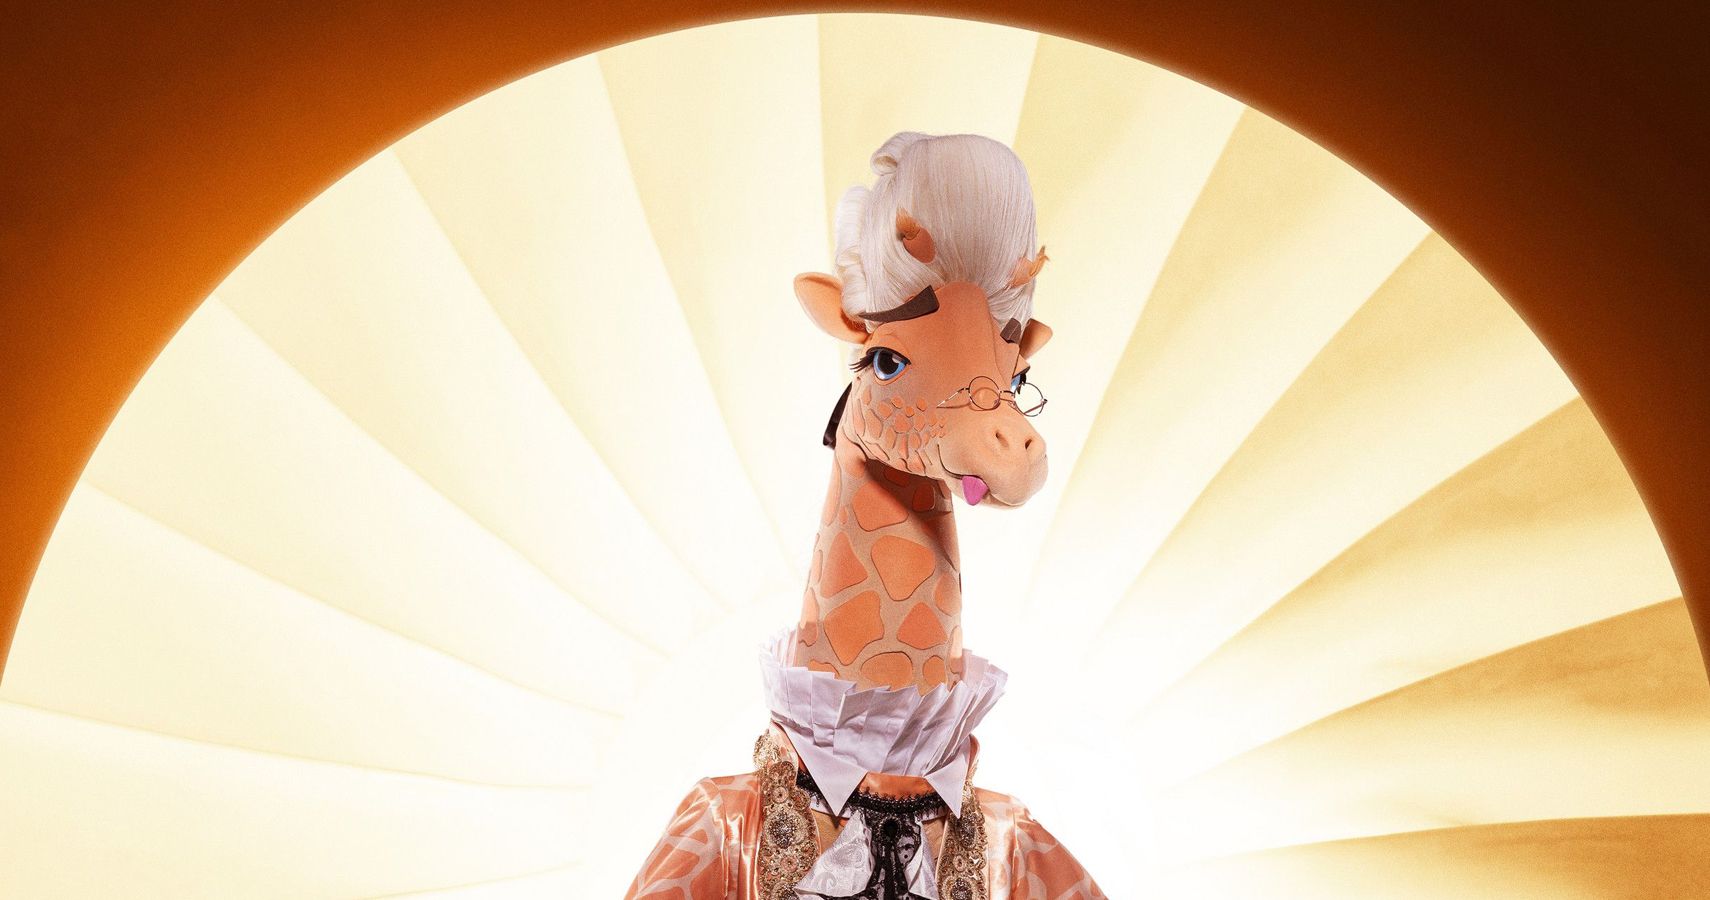 This Teen Heartthrob Revealed As The Giraffe On ‘The Masked Singer’